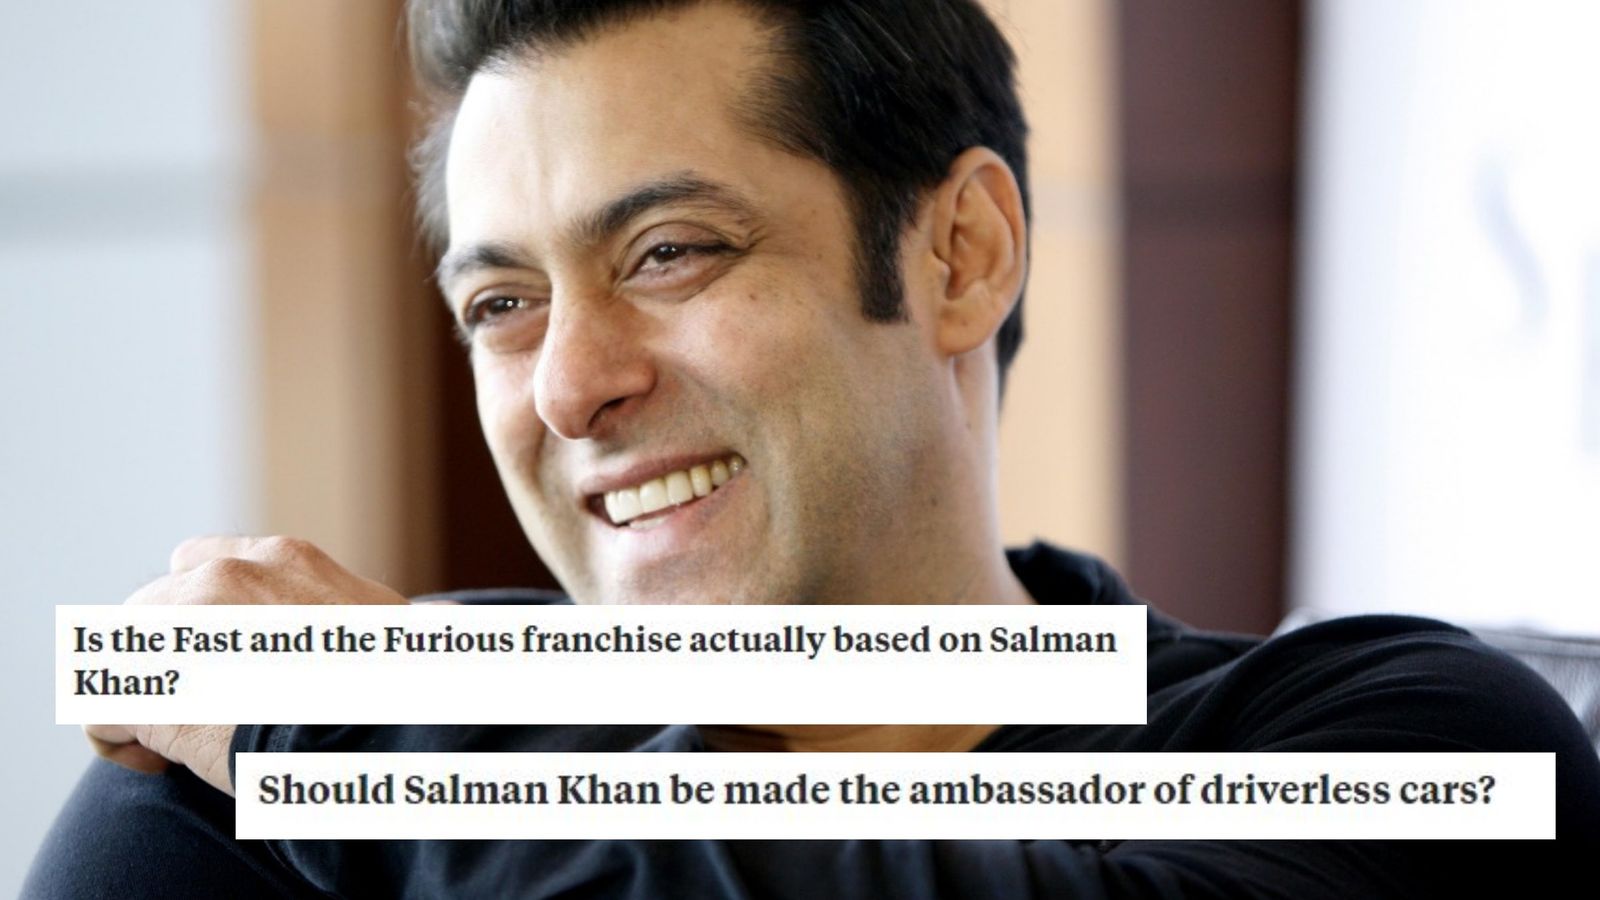 9 Random Salman Khan Queries On Quora That Will Change The Way You Look At Him Forever!